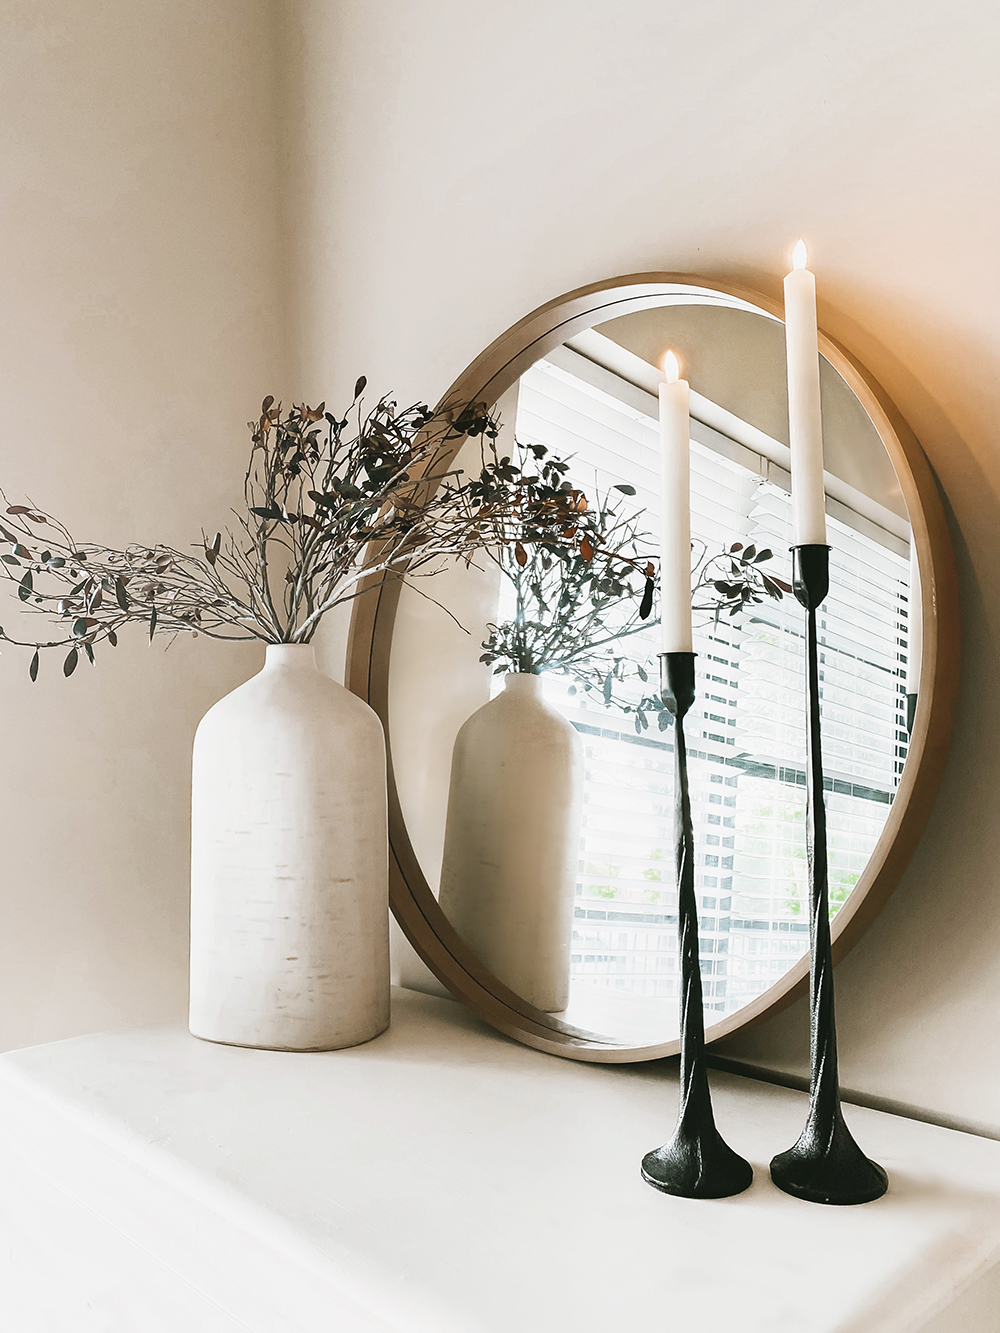 An easy fall decor idea for you and it's all about decorating with branches! This is such a great way to invite the season into your home and give your space a touch of fall. A simple DIY that you can have done in just a few minutes. Catch it all over on KaraLayne.com!